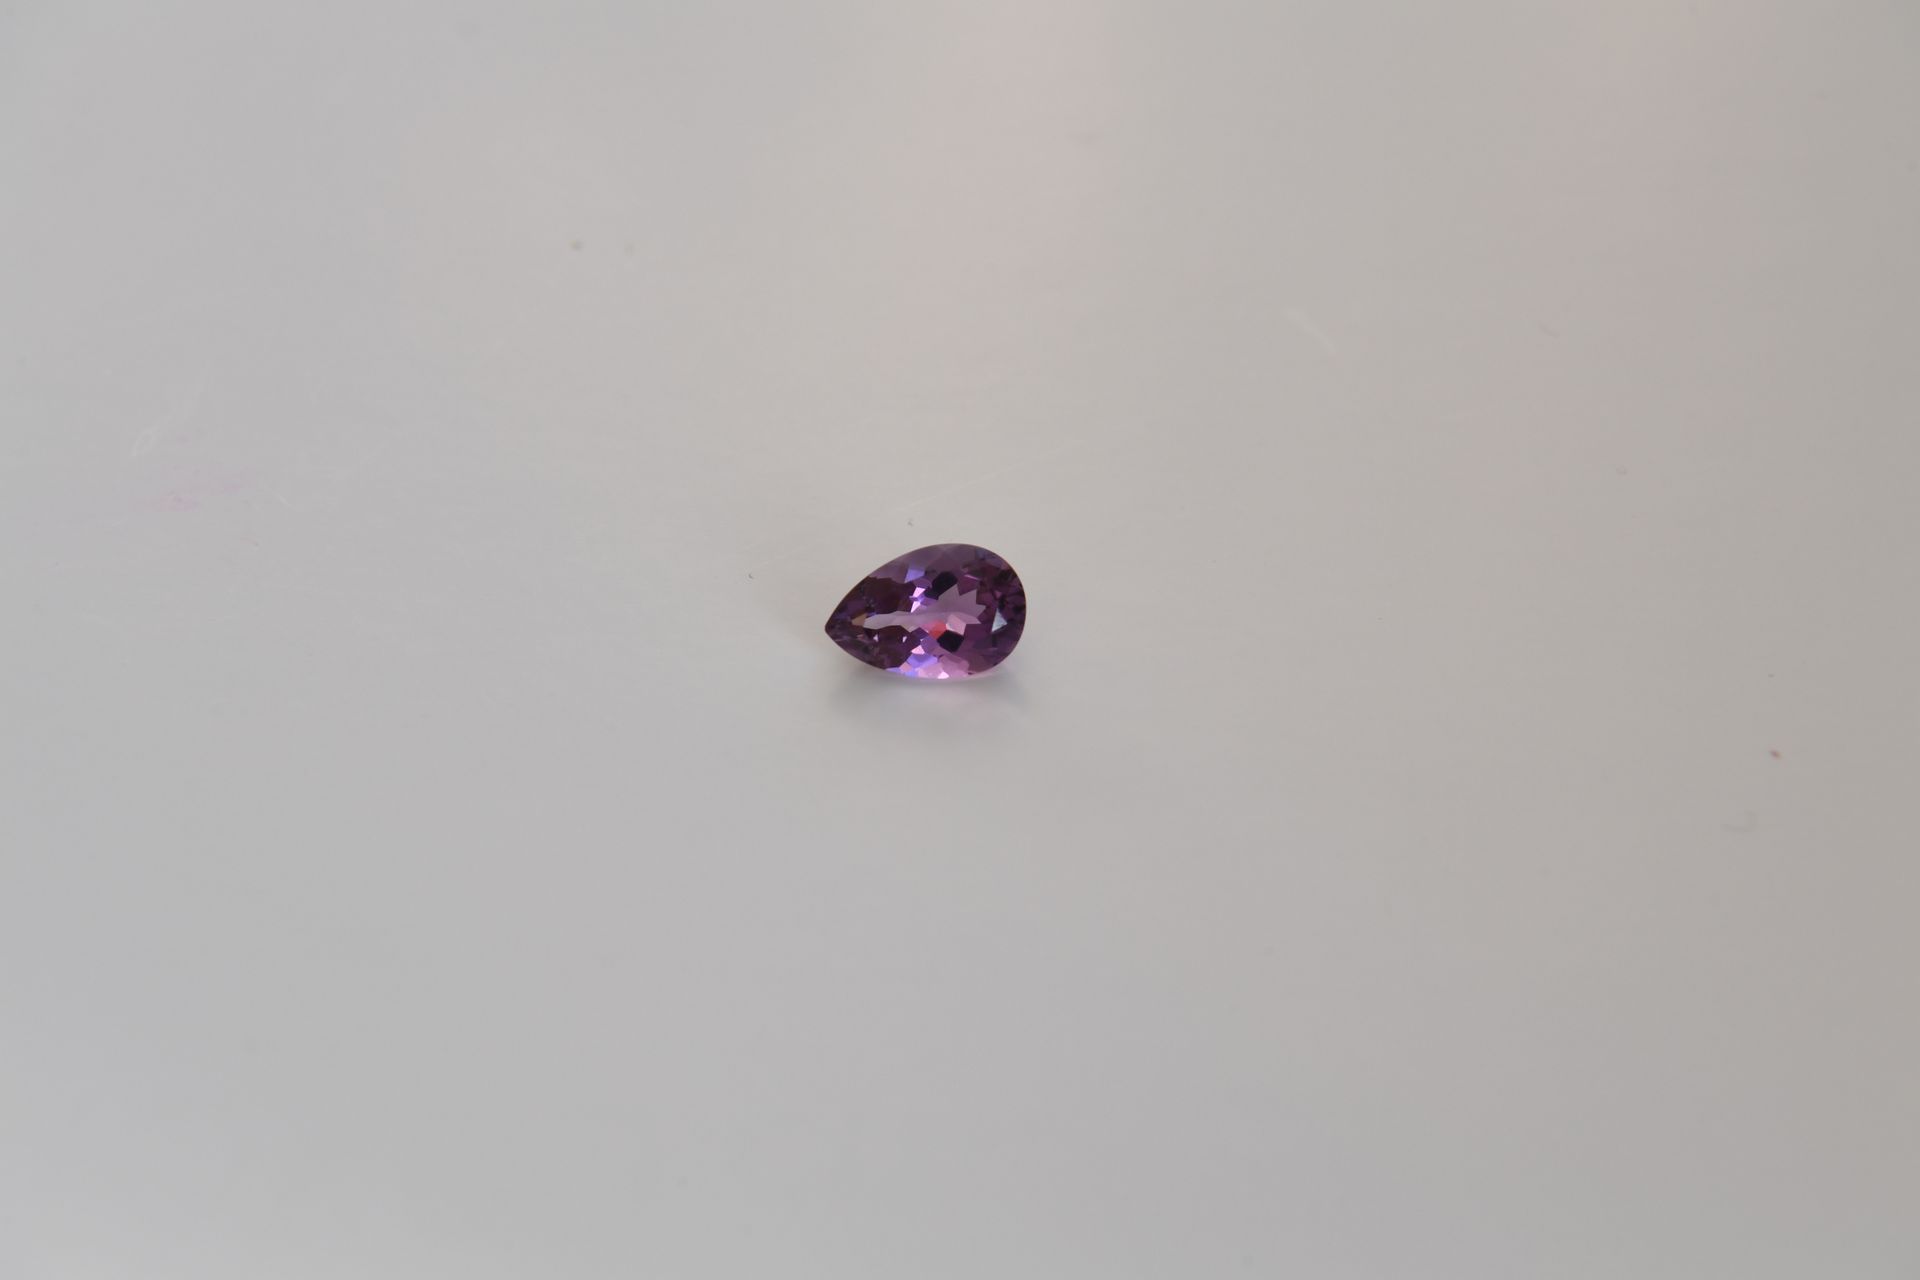 Null Pear cut amethyst weighing approximately 5 carats.